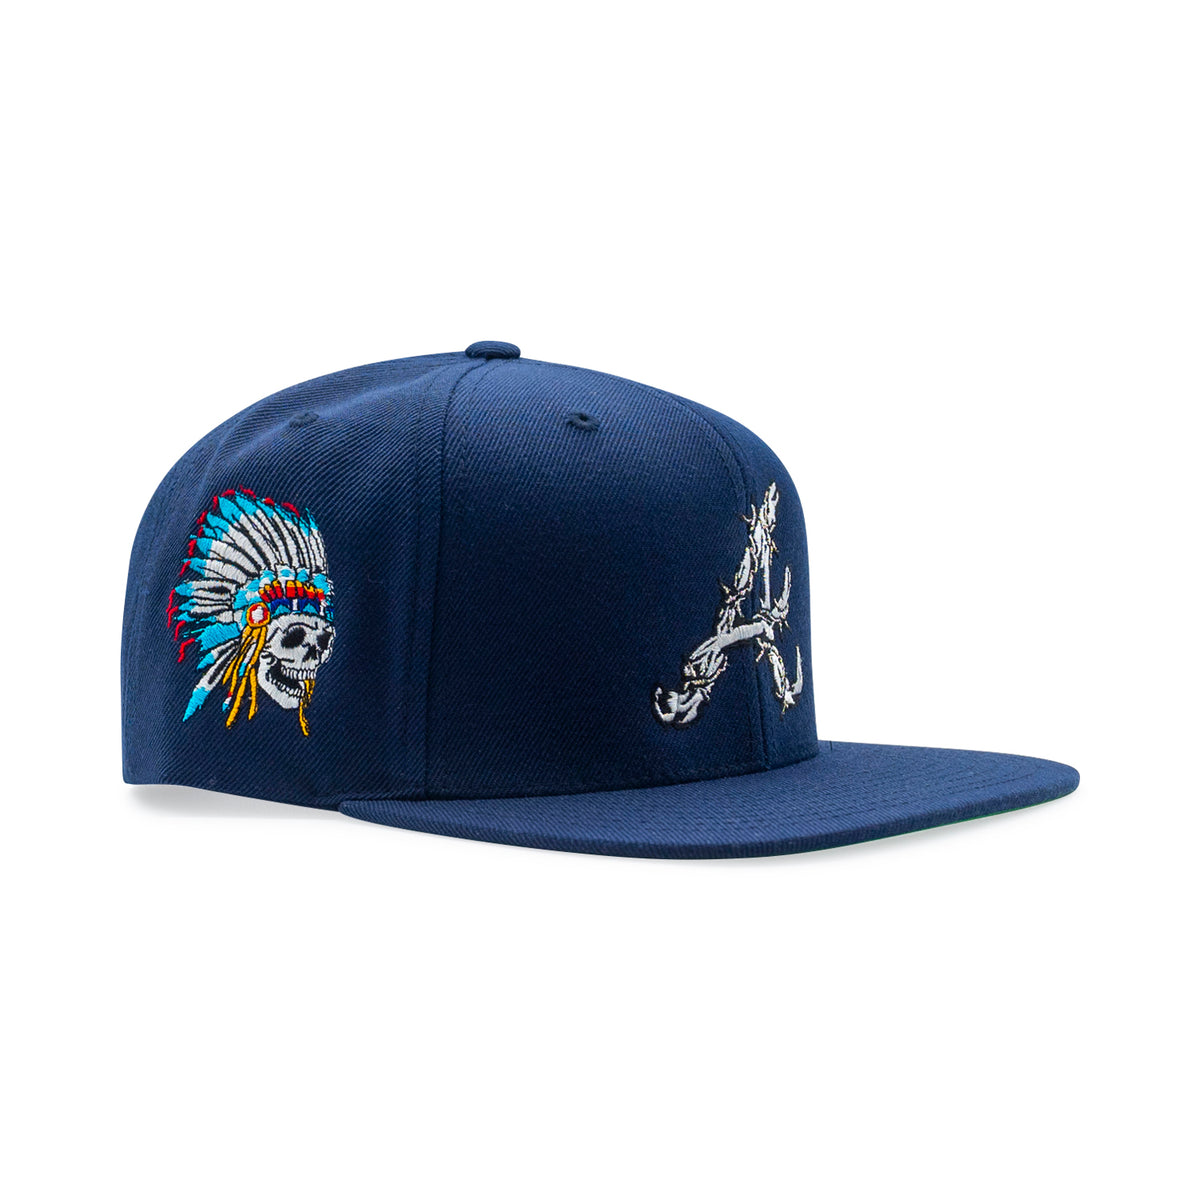 A Barbed Wire Snapback Hat | Navy Blue